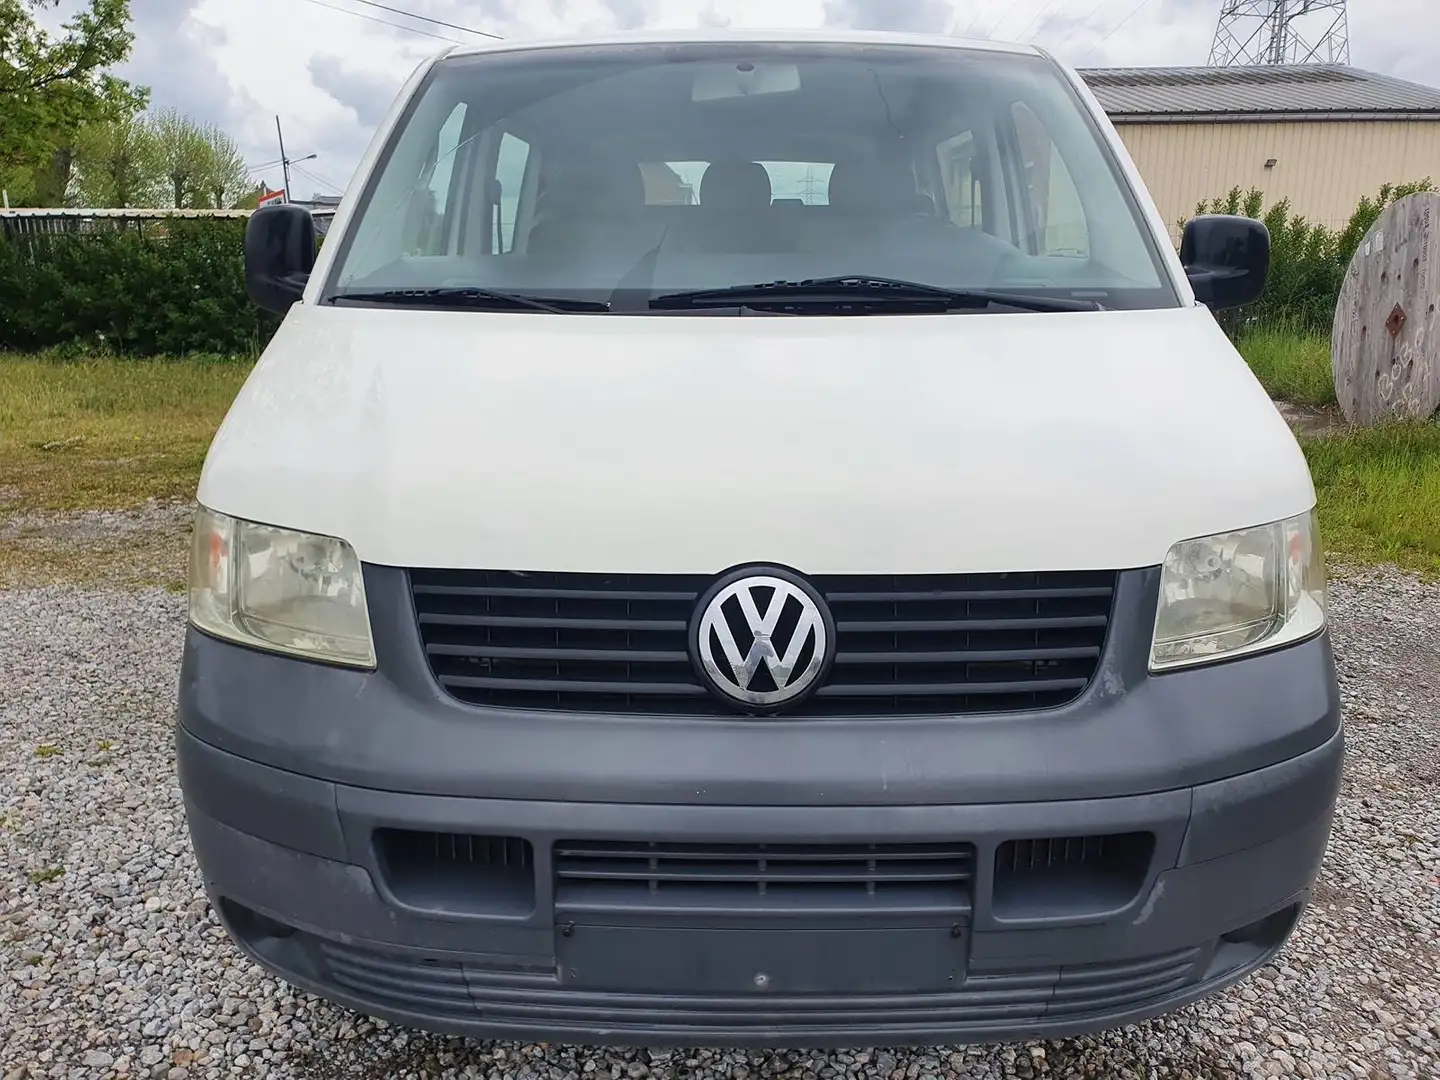 Volkswagen T5 T5 1.9tdi double cabine UTILITAIRE 5places carnet. Weiß - 2